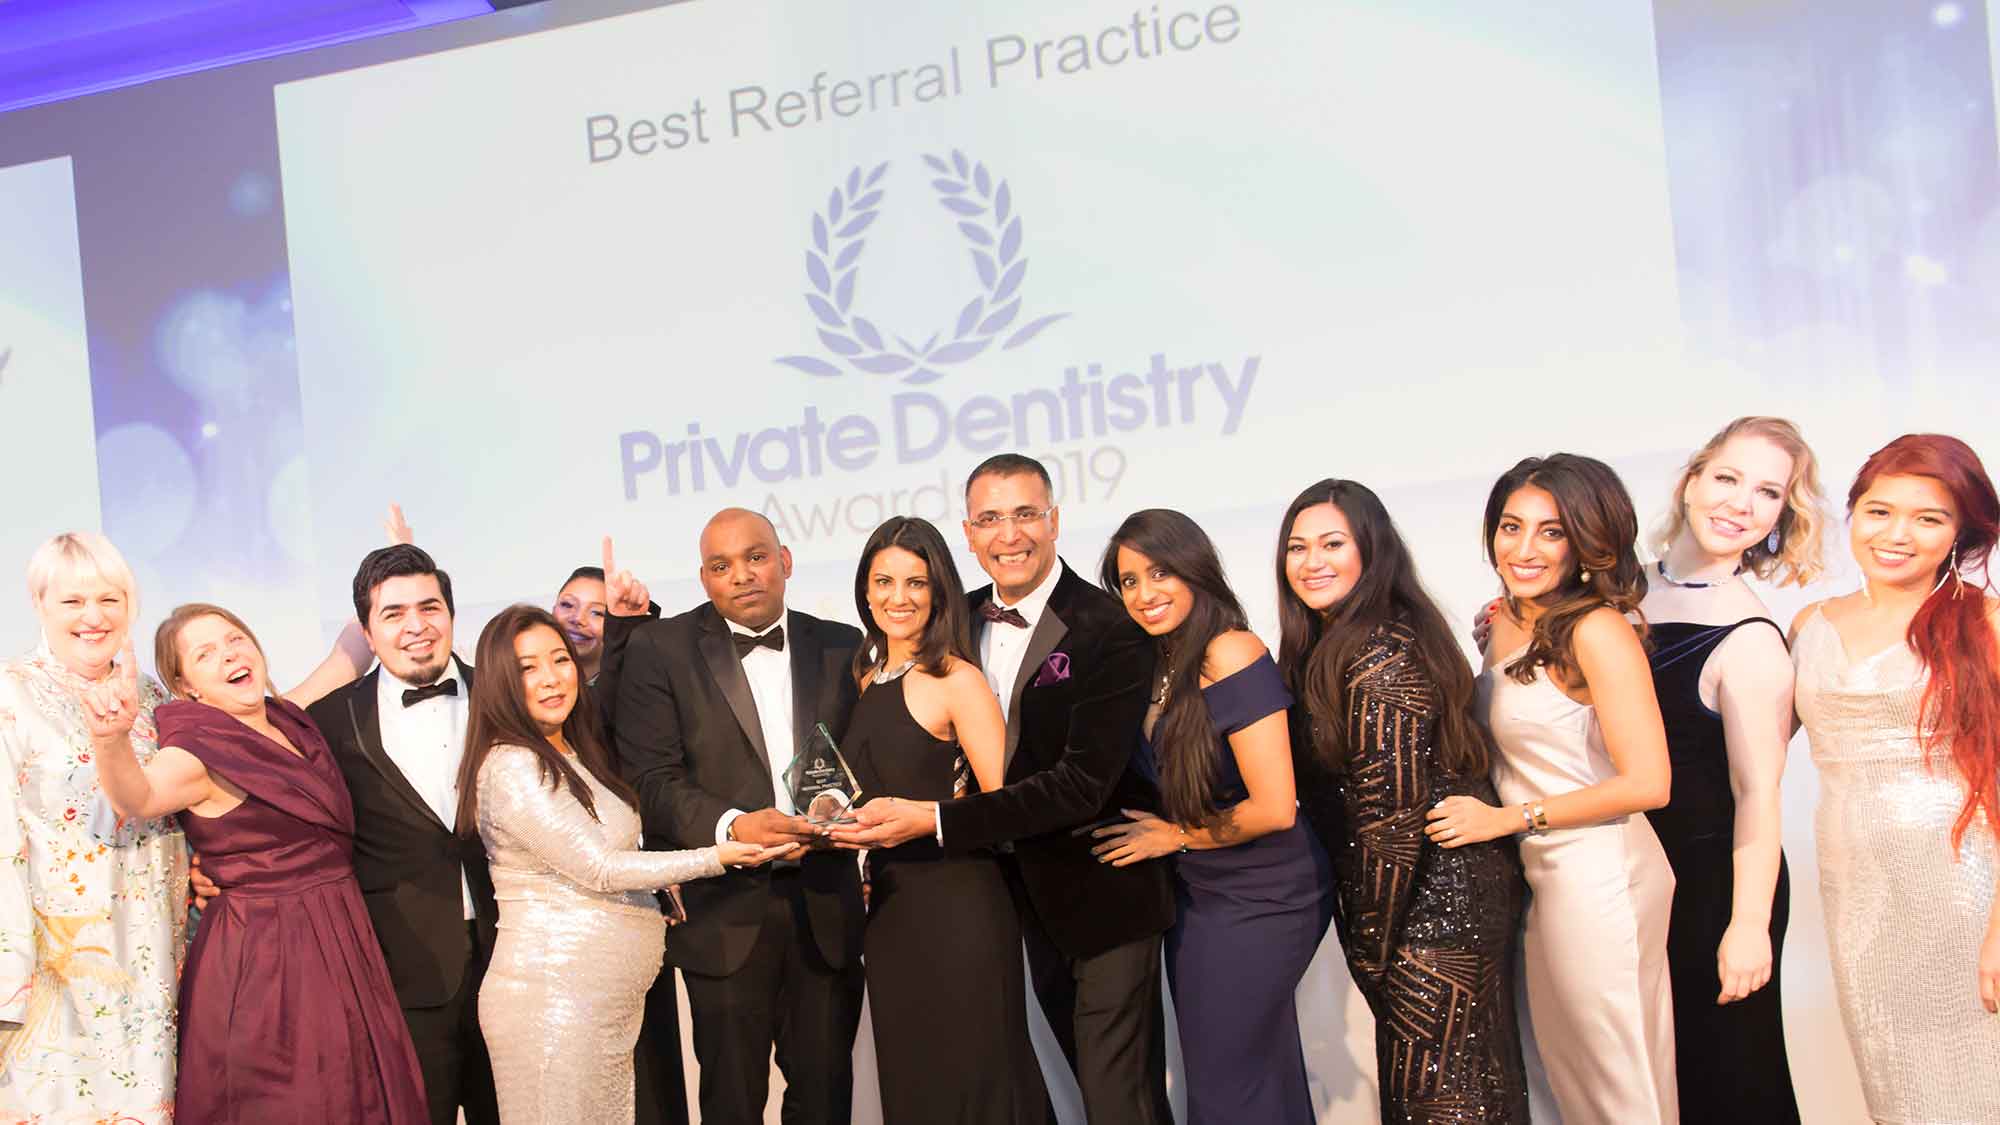 Multiple award winners Angela Auluck and Dev Patel, of The Dental Rooms